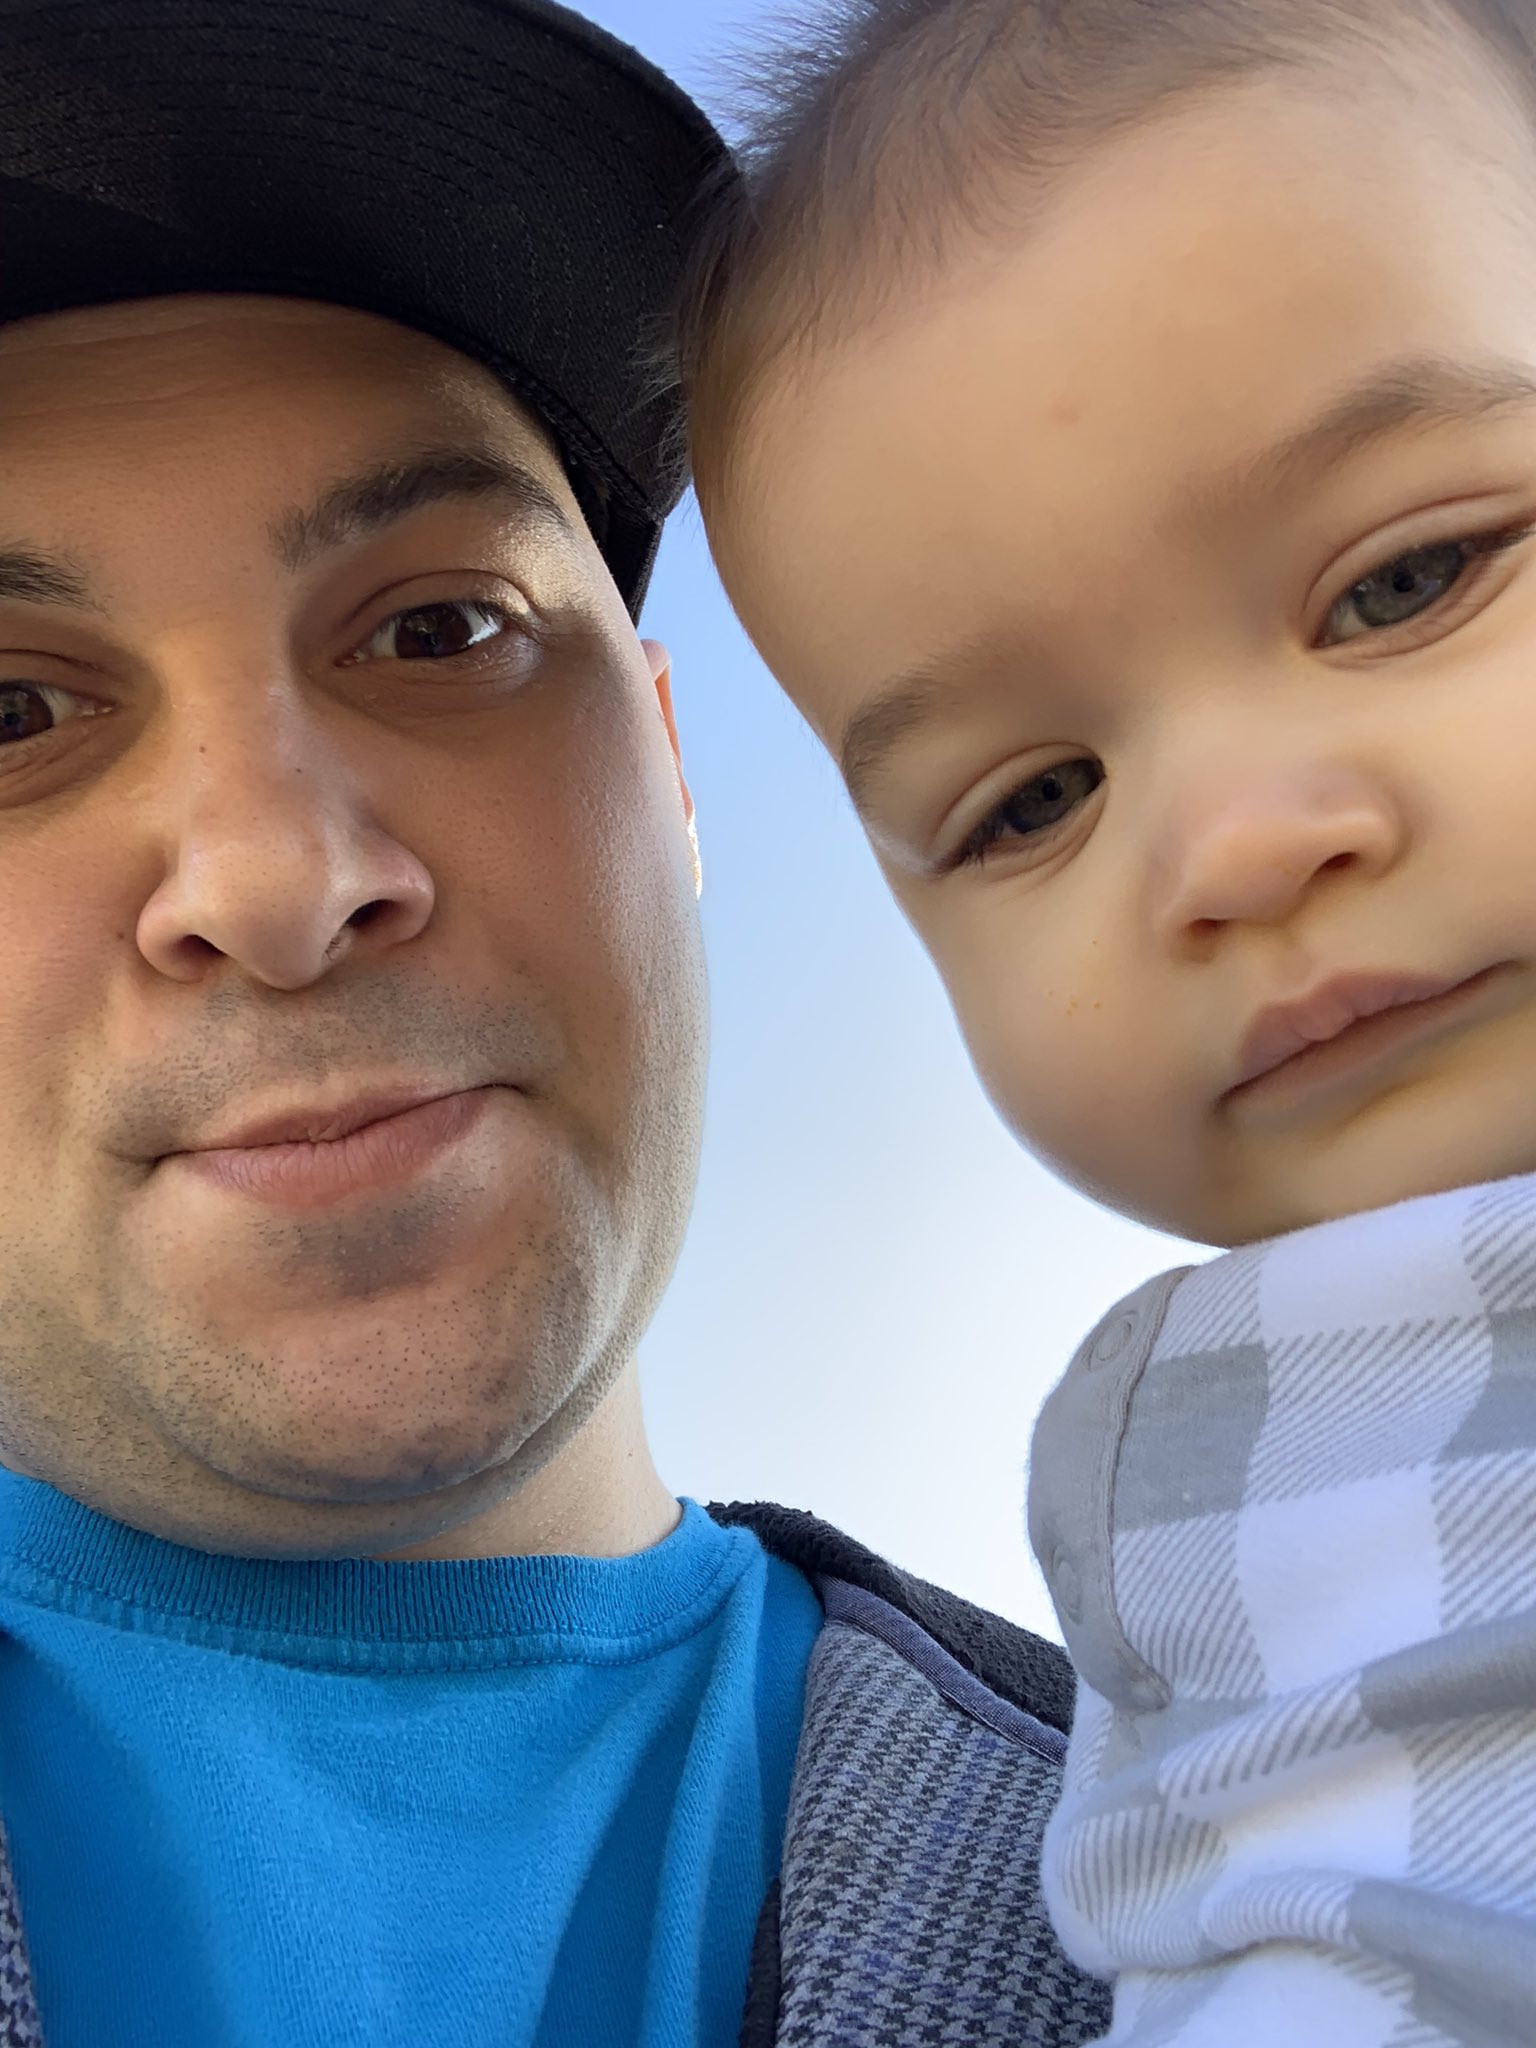 Keyin On Twitter Our Morning Walk I Love This Little Guy So Stinkin Much Because Of Your Guys Support For What I Do I Get So Much More Time To Soak Up - kindly keyin roblox character